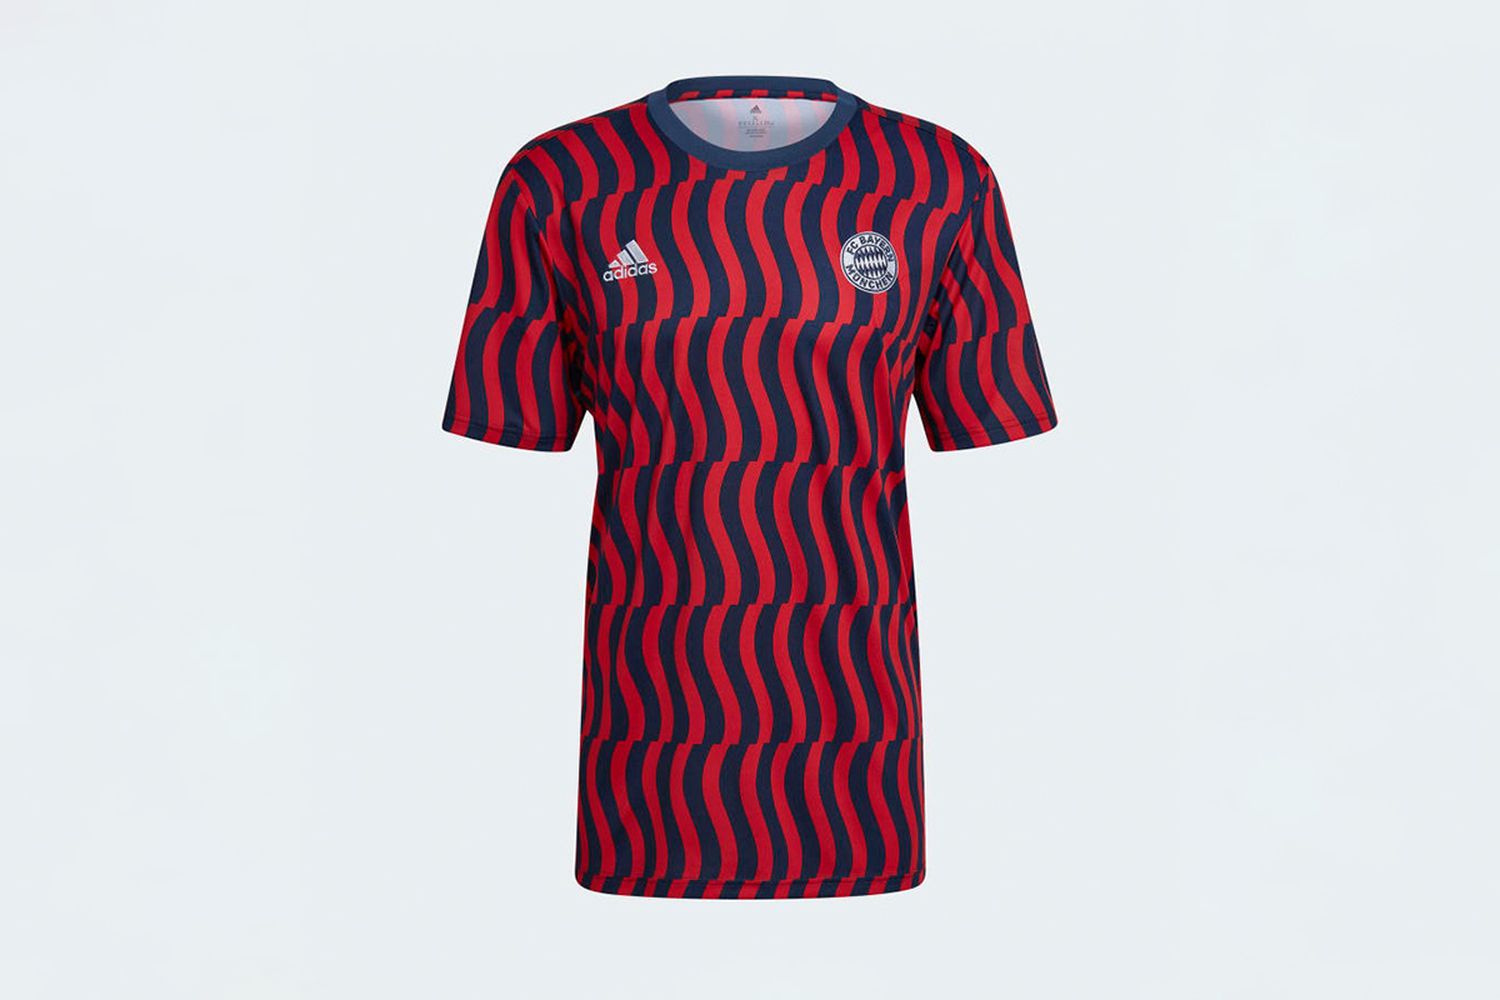 10 of the Best Football Shirts to Wear in